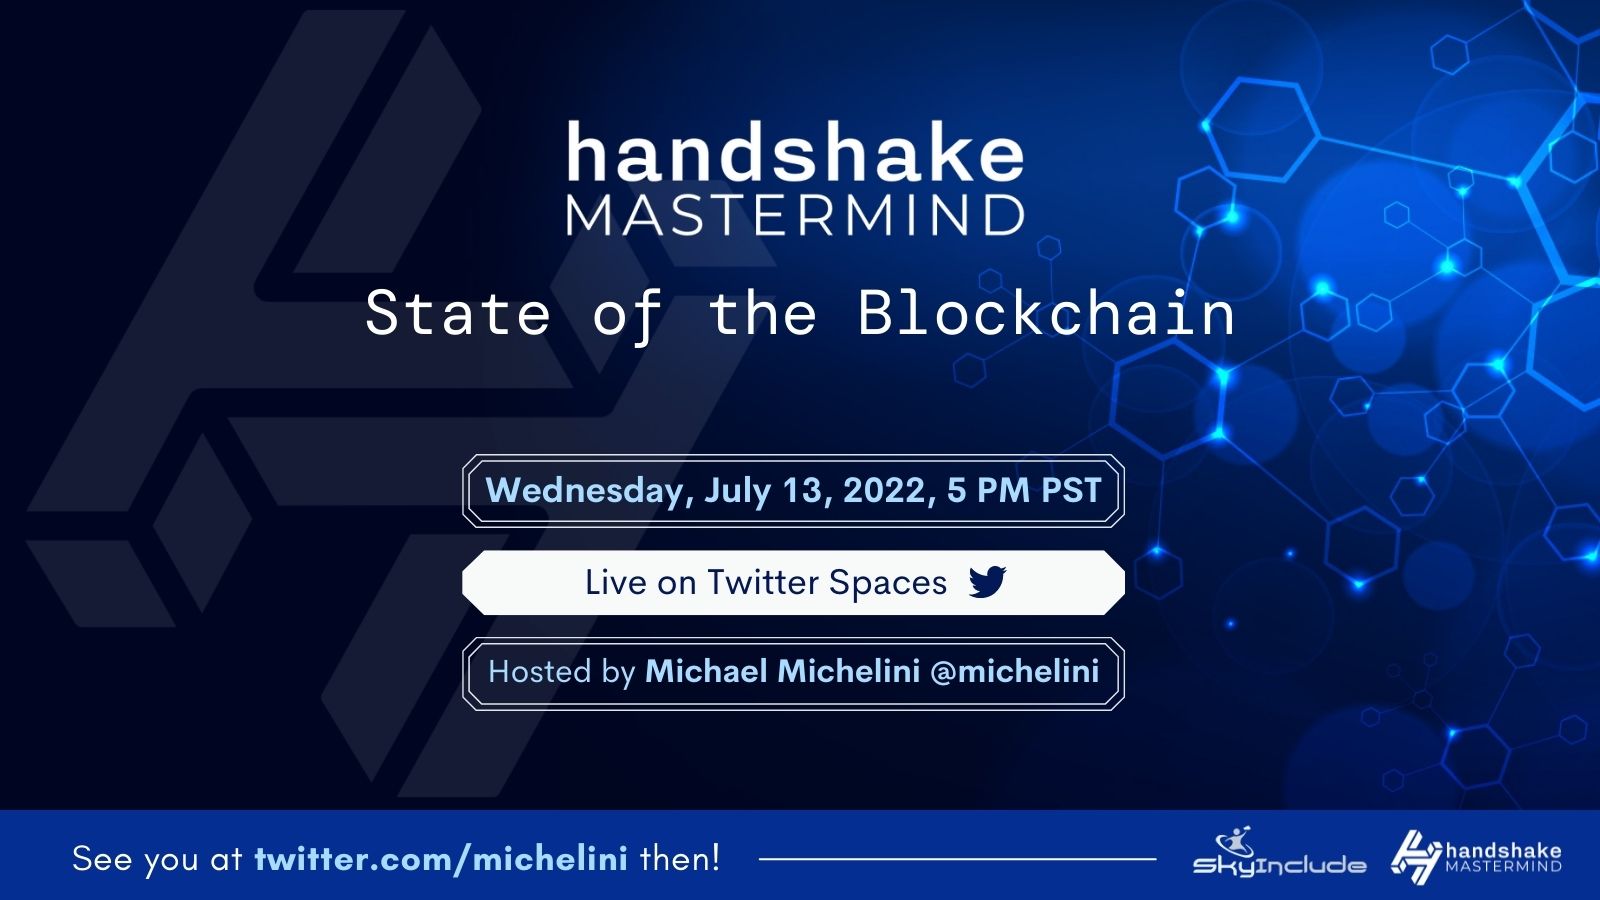 HNS Open Discussion - State of the Blockchain